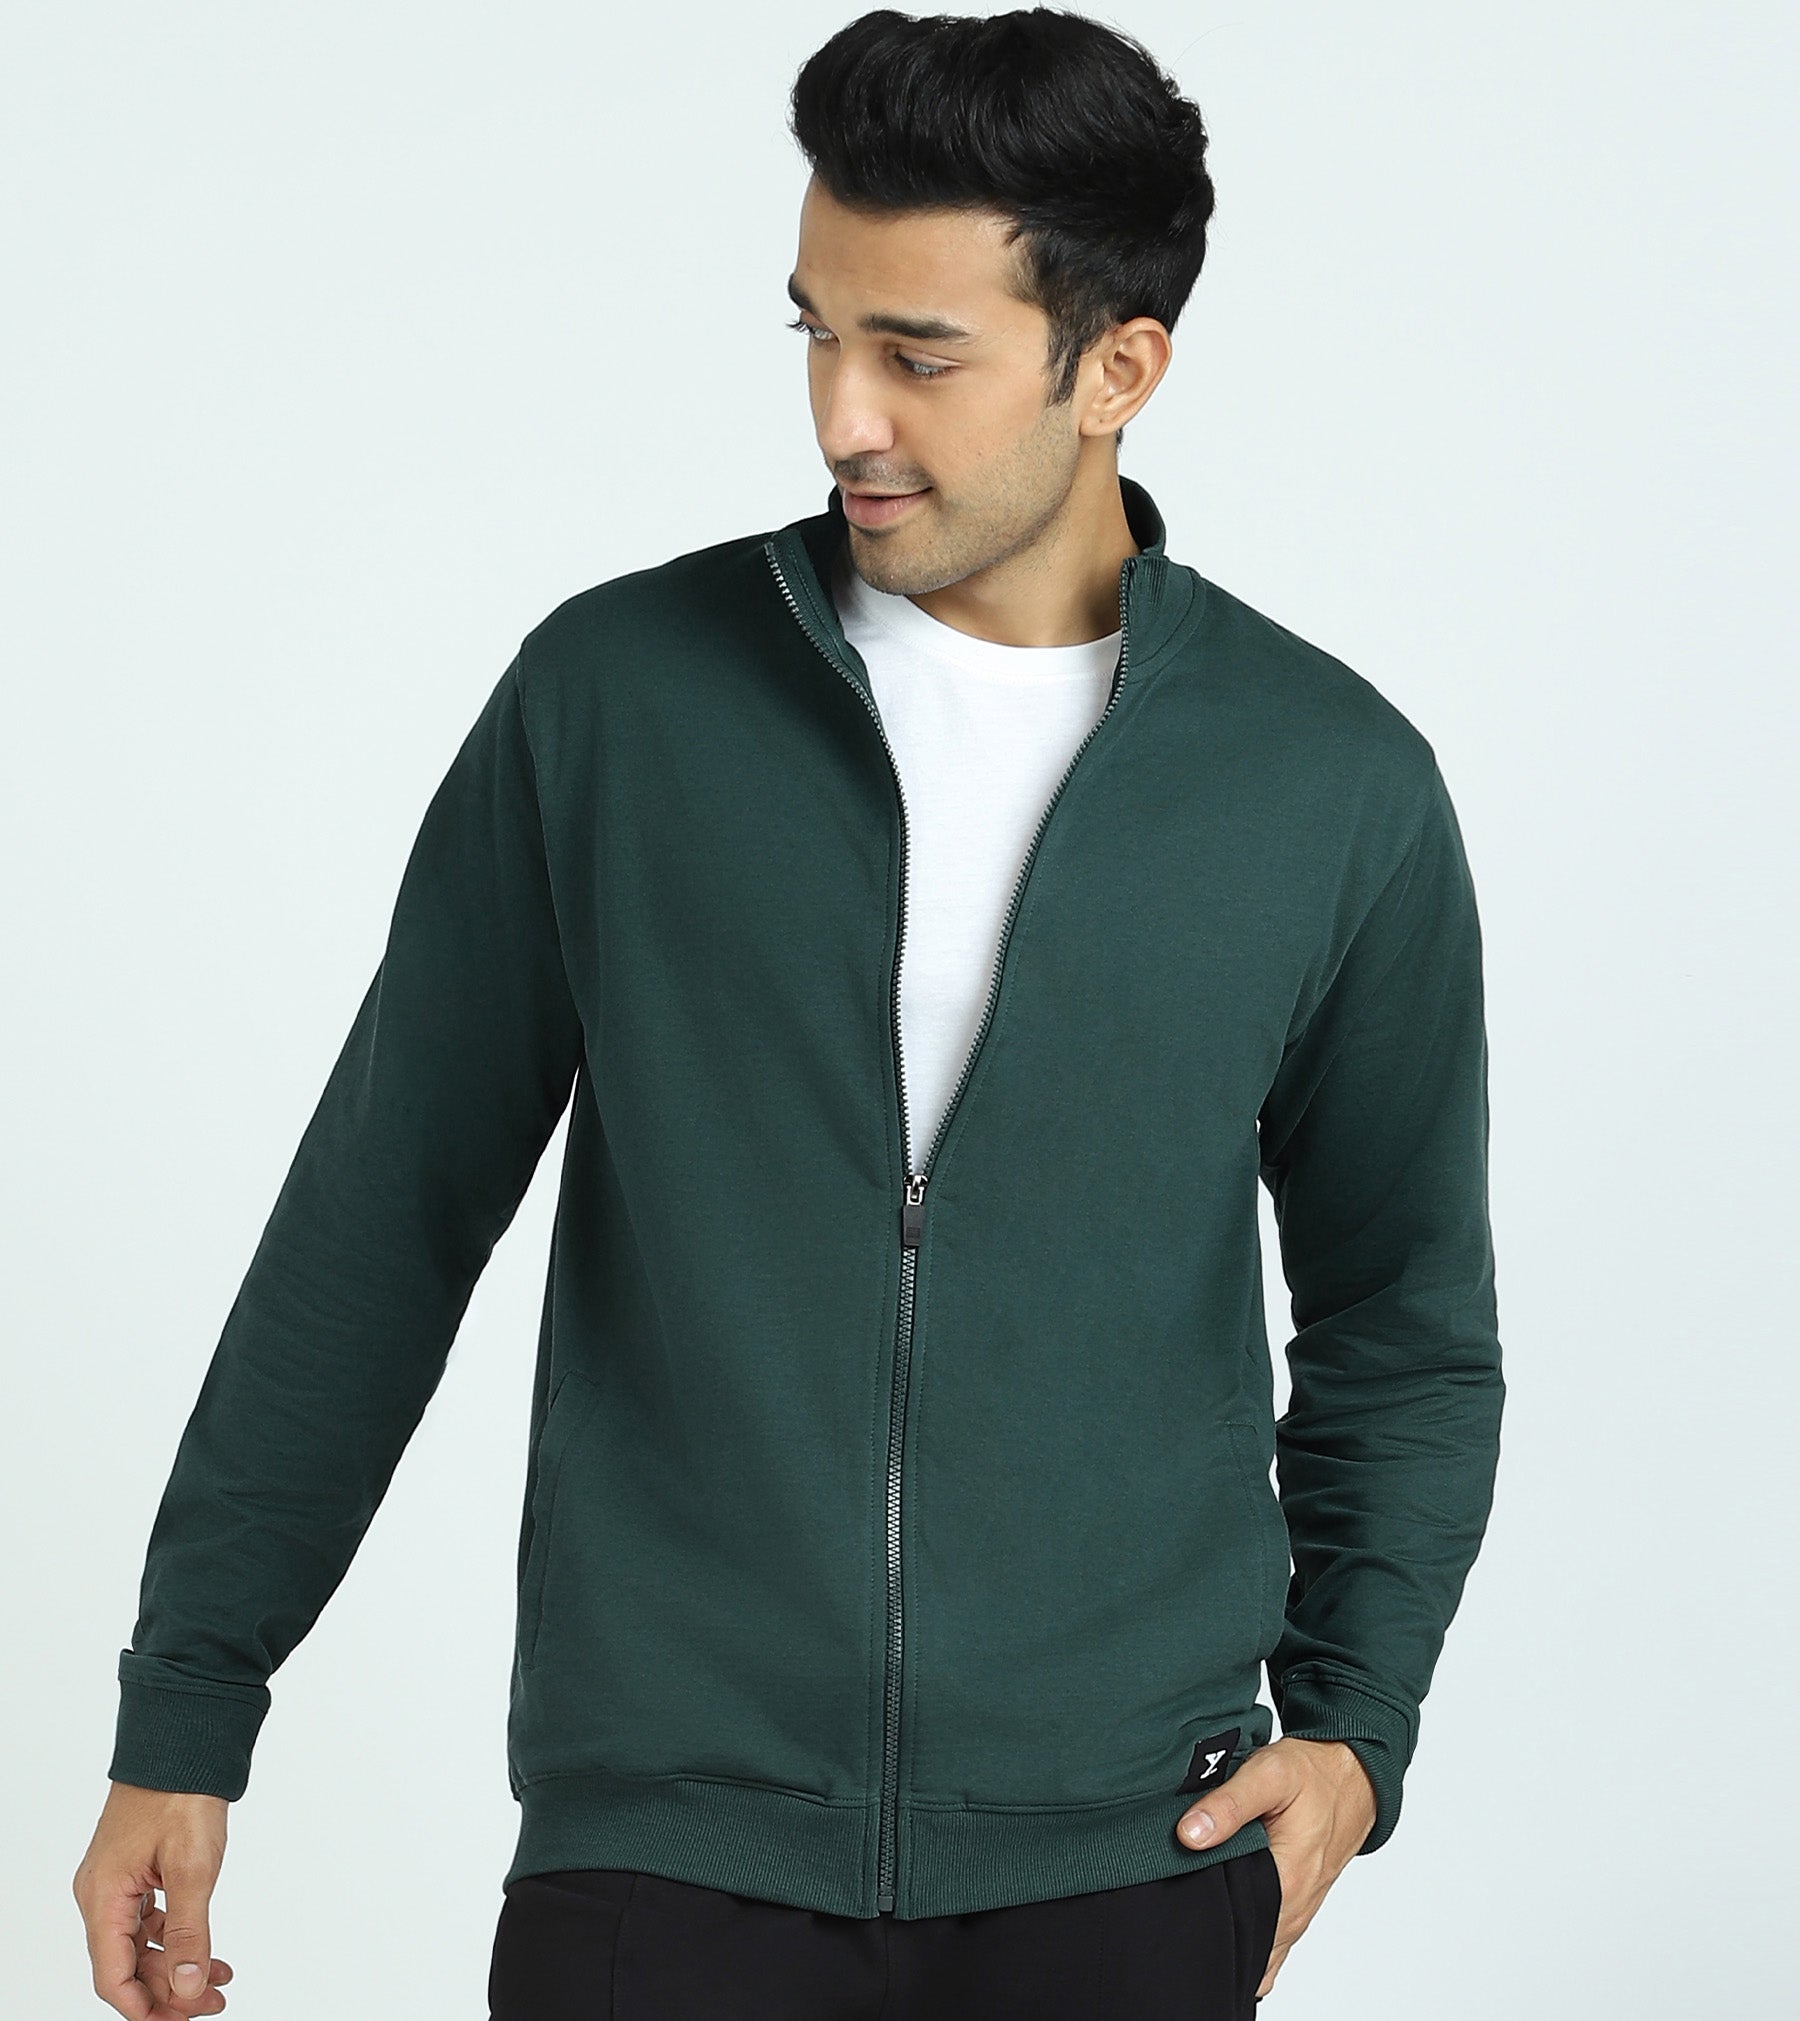 Cruze French Terry Cotton Zip Ups For Men Forest Green -  XYXX Crew